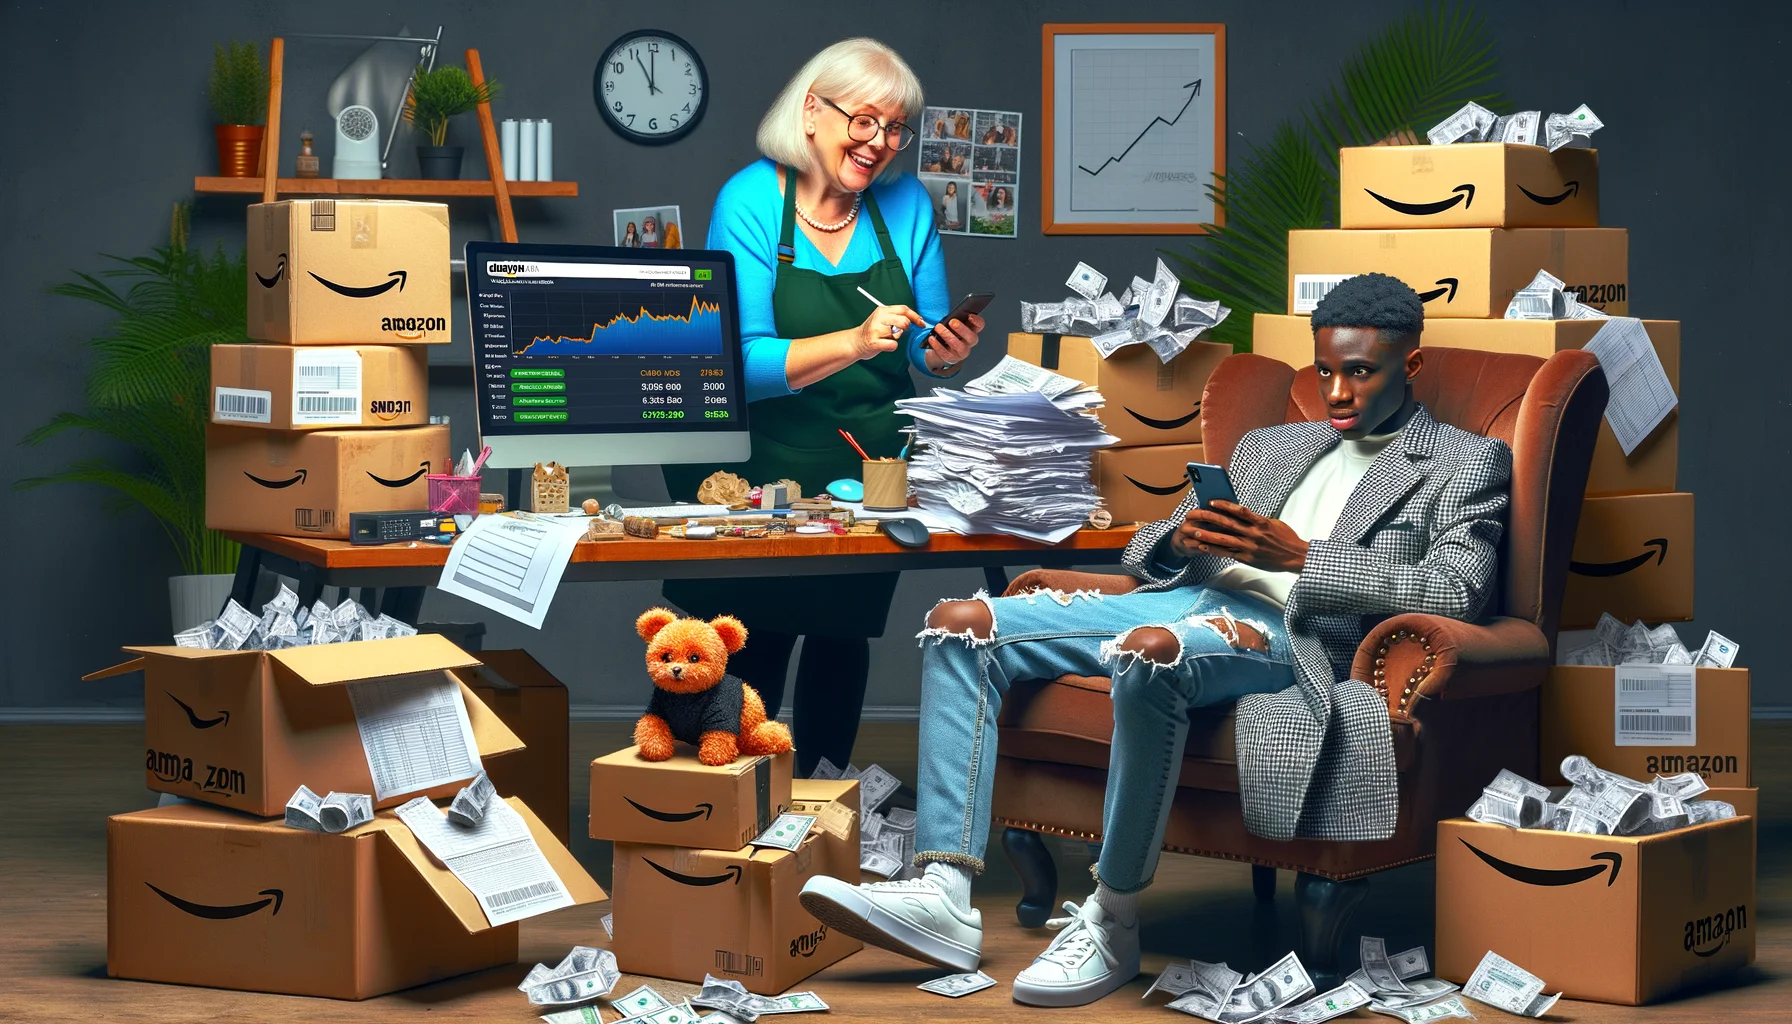 Create a comical, real-life image showing a humorously exaggerated contrast between an Amazon affiliate and a social media influencer. The Amazon affiliate is a middle-aged Caucasian woman, diligently working at her cluttered desk filled with paper works, shipment boxes and a computer showing high conversion rates. The influencer, on the other hand, is a young, Black male, casually lounging on a chair, engrossed in his smartphone with a myriad of glowing notifications, fashionably dressed and accompanied by a cute pet. The scene should exaggerate the chaos and order of their lifestyles, emphasizing the humor.